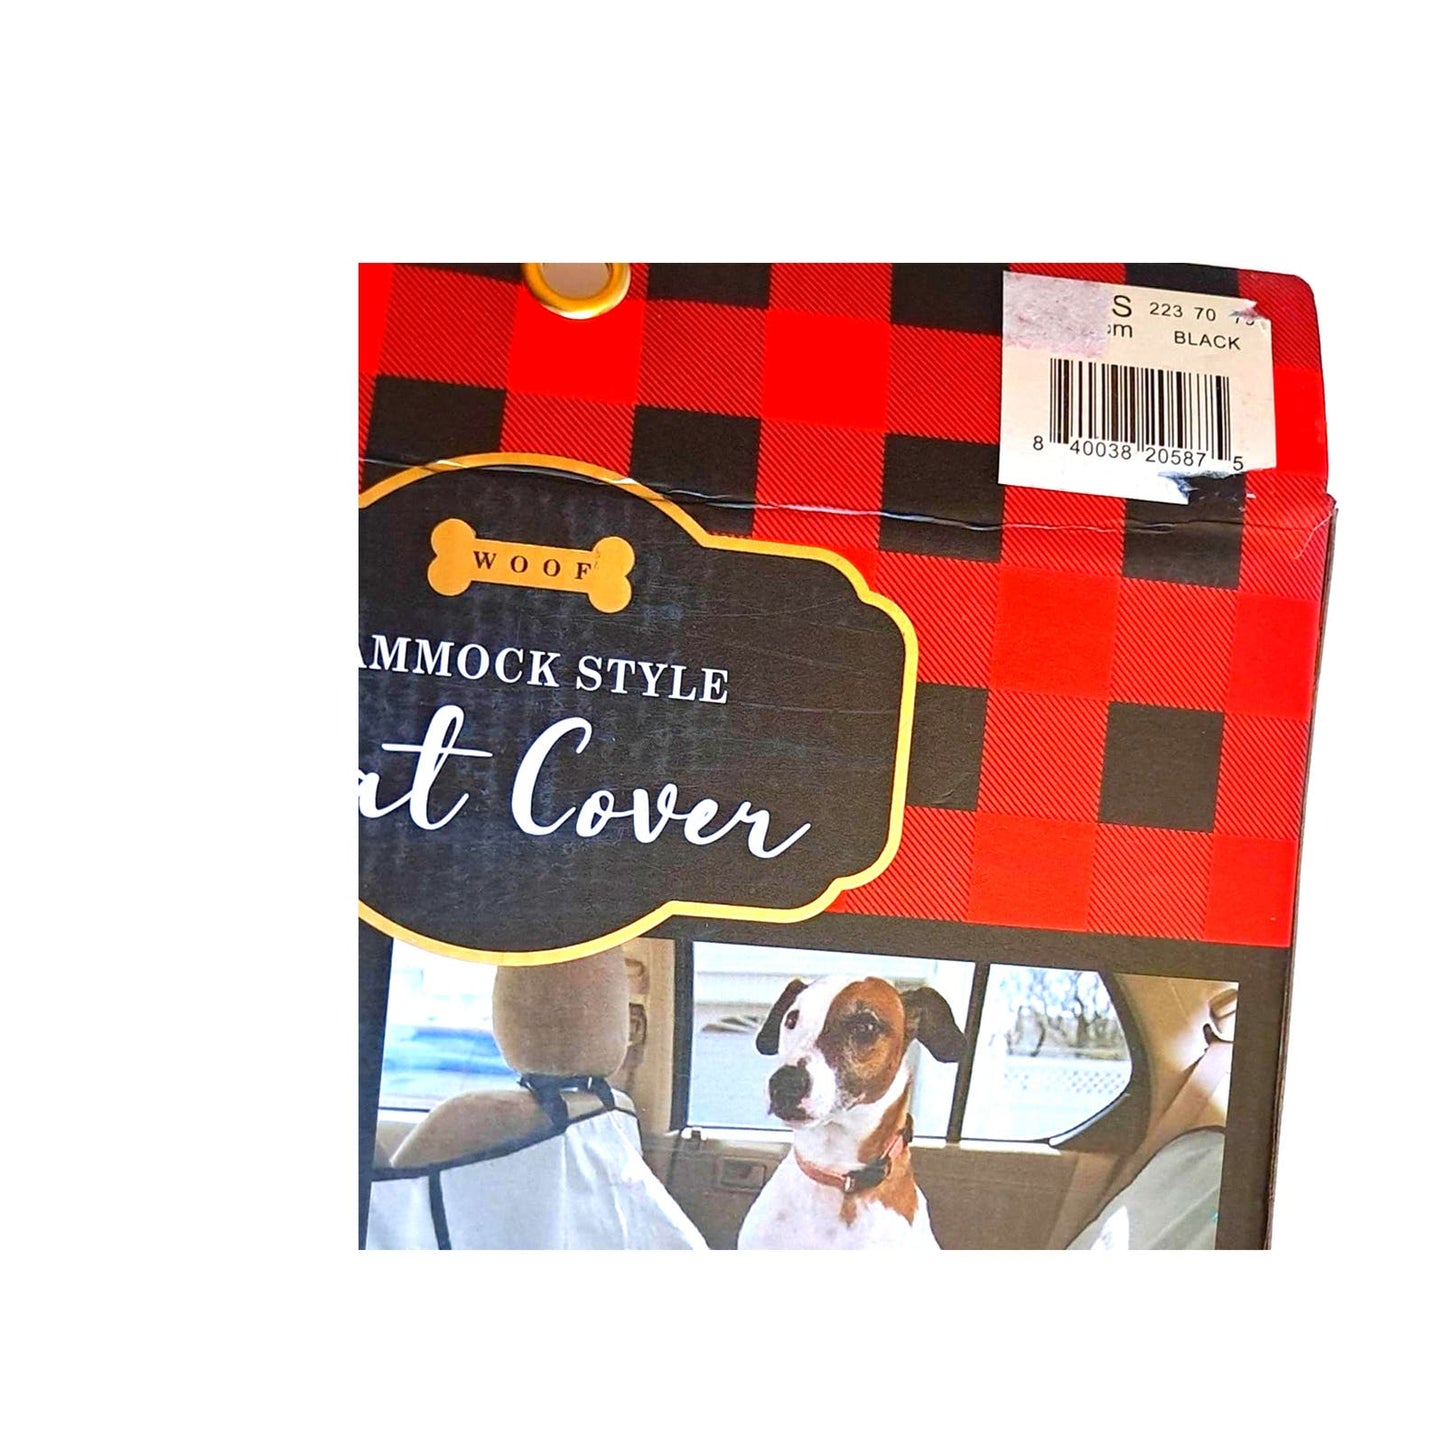 WOOF hammock style pet seat cover NEW IN Box BLACK Universal Fit